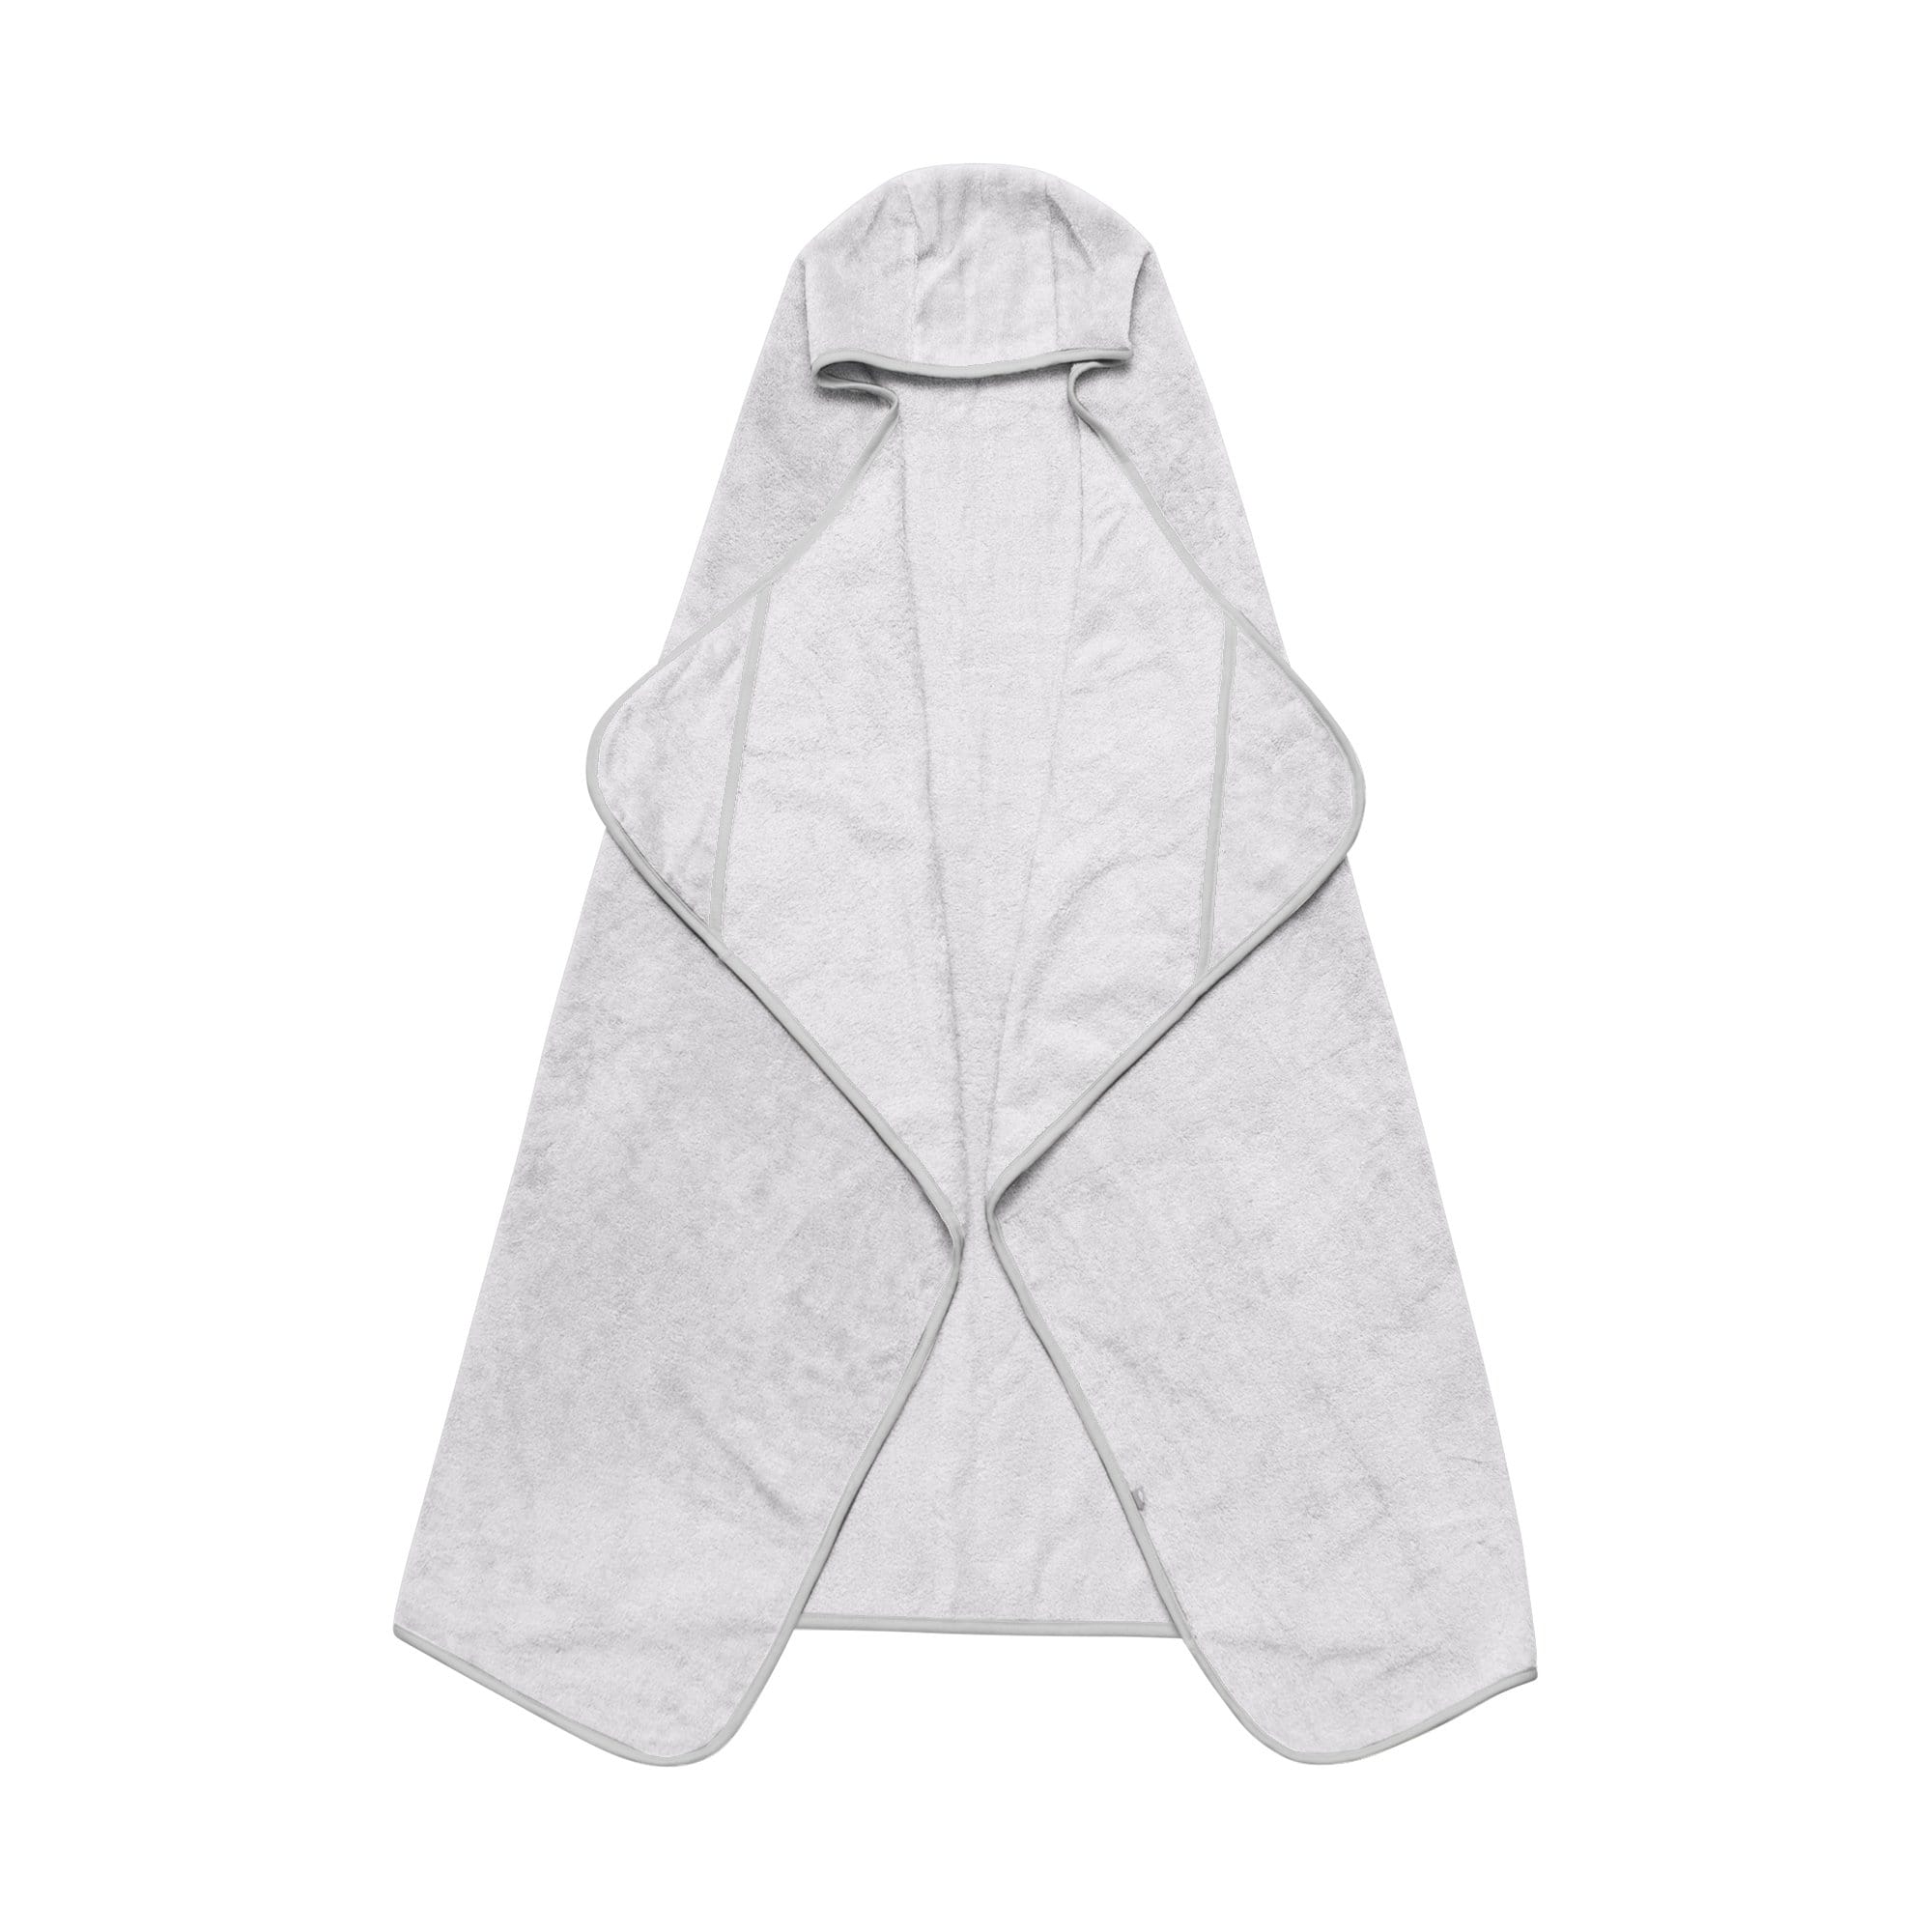 Kyte Baby Toddler Hooded Bath Towel in Storm